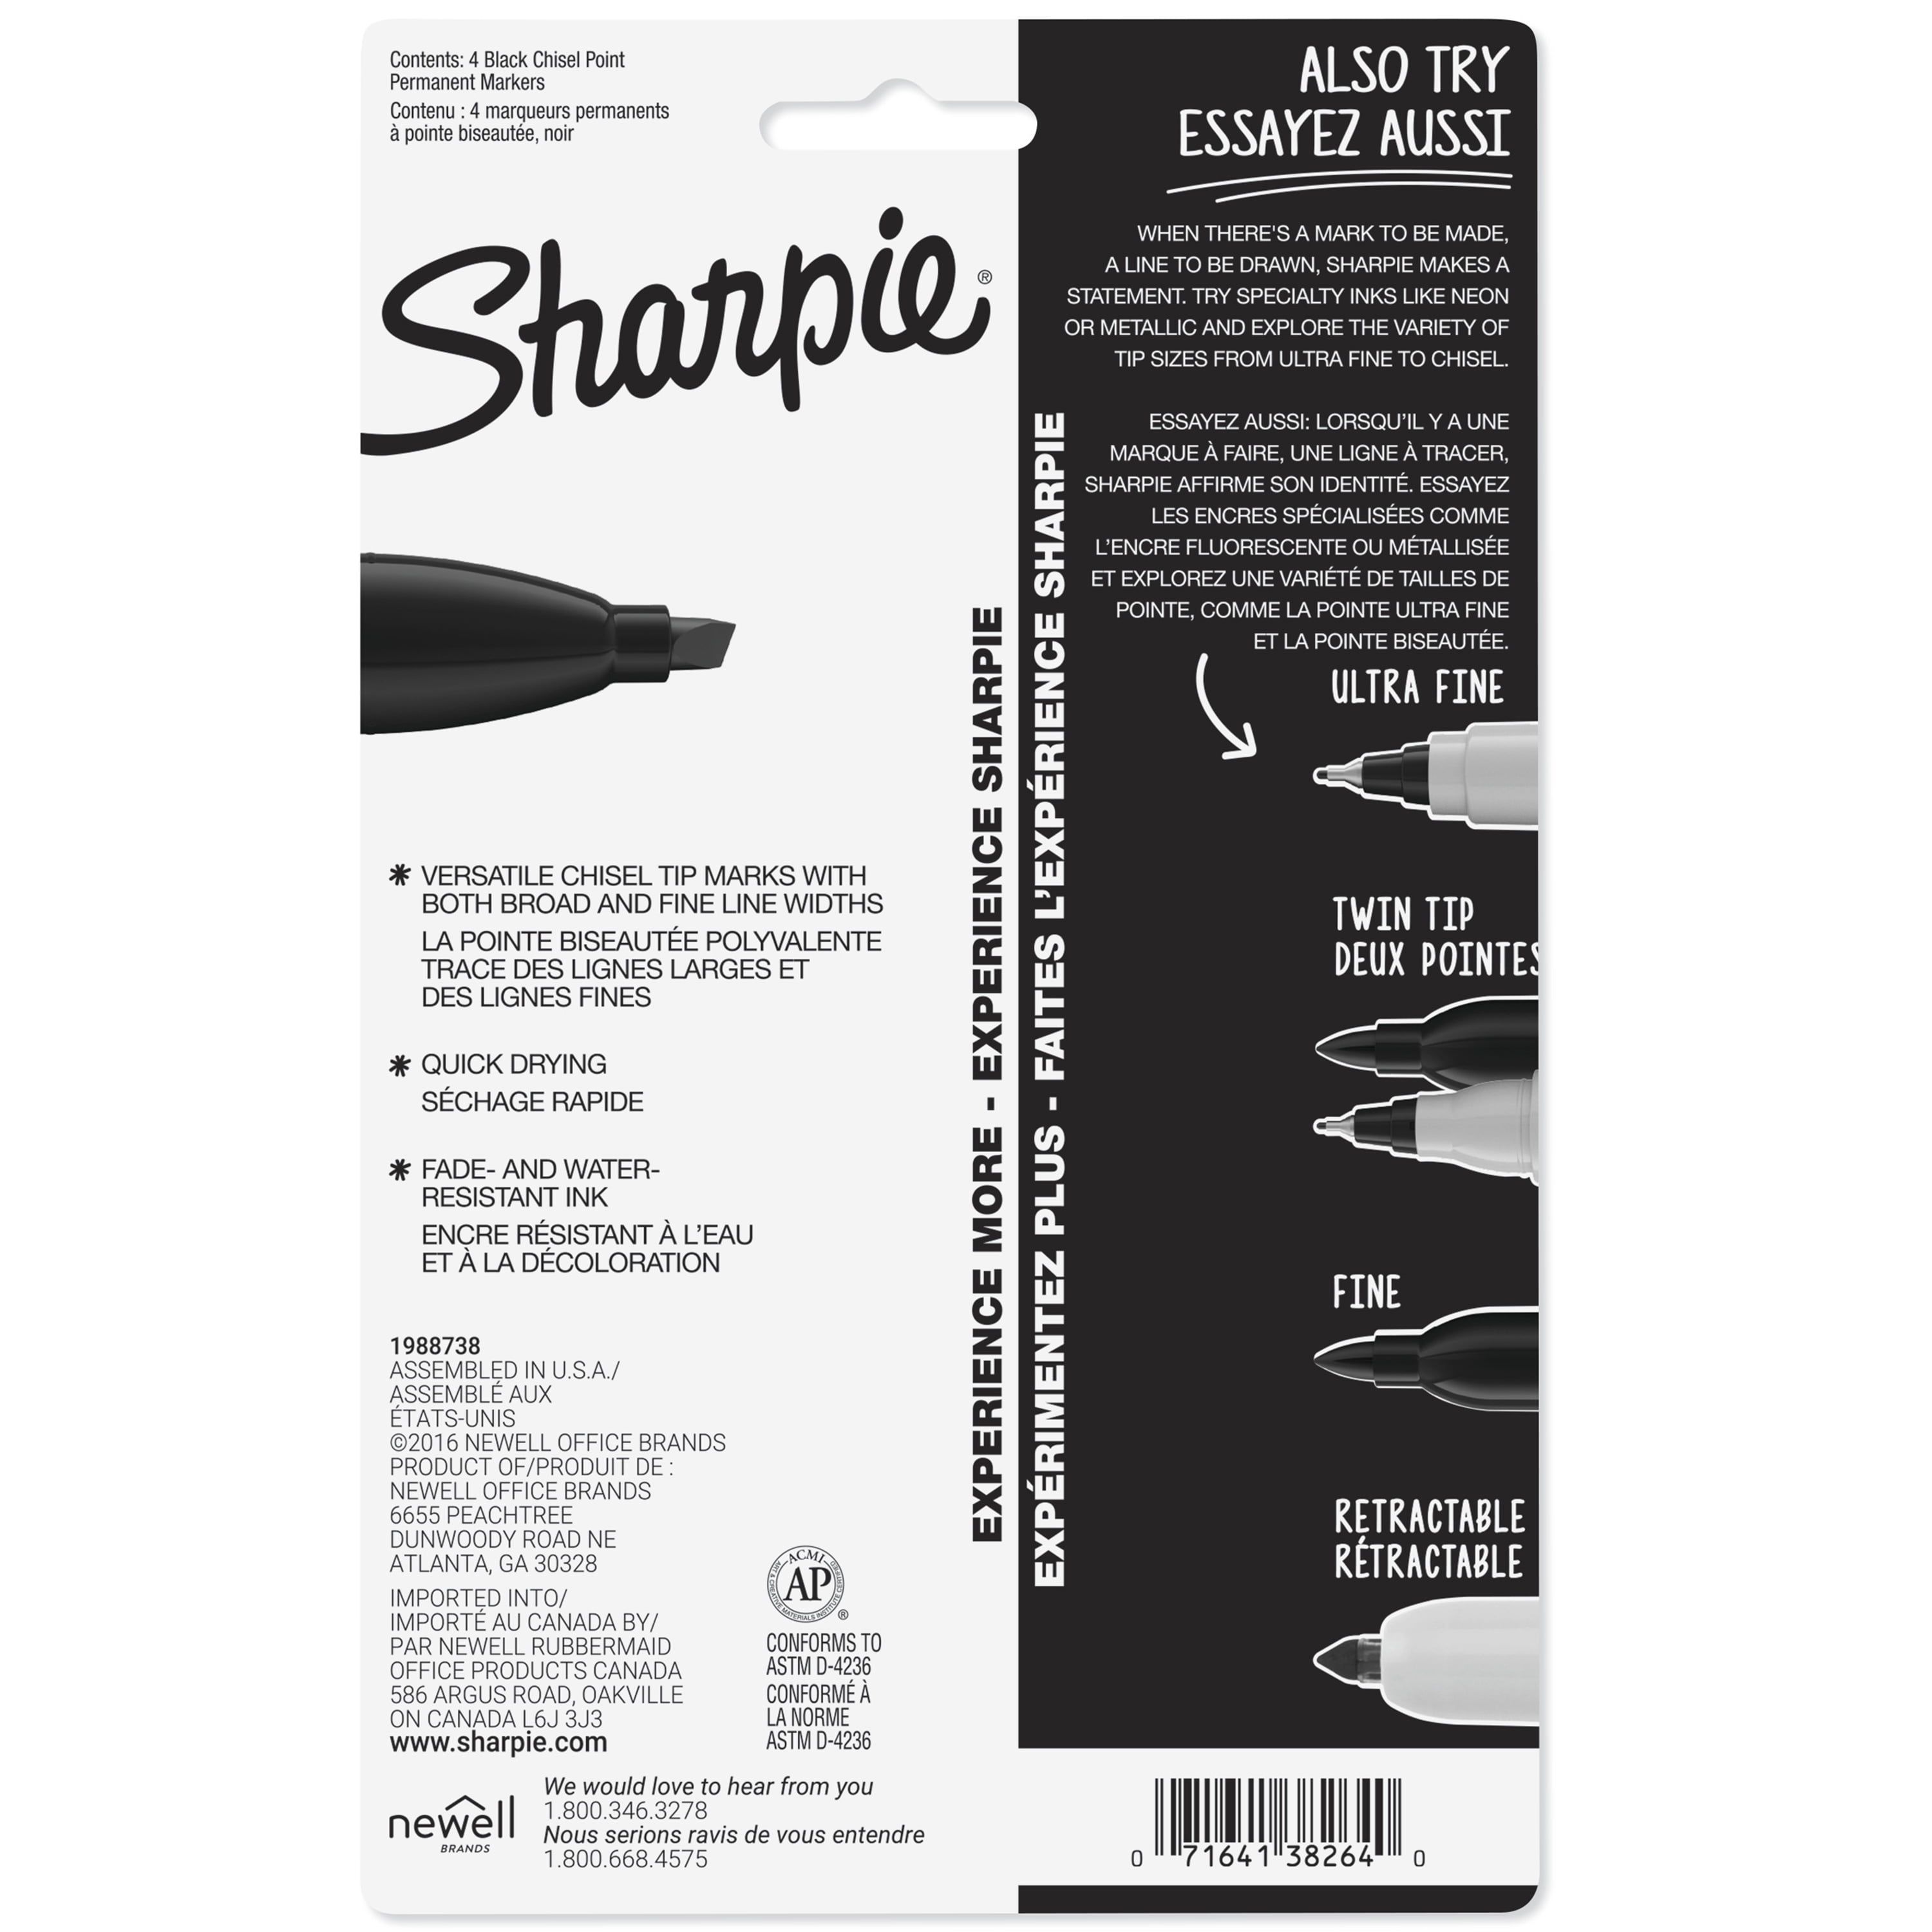 Sharpie - Permanent Marker: Black, AP Non-Toxic, Chisel Point - 94477577 -  MSC Industrial Supply